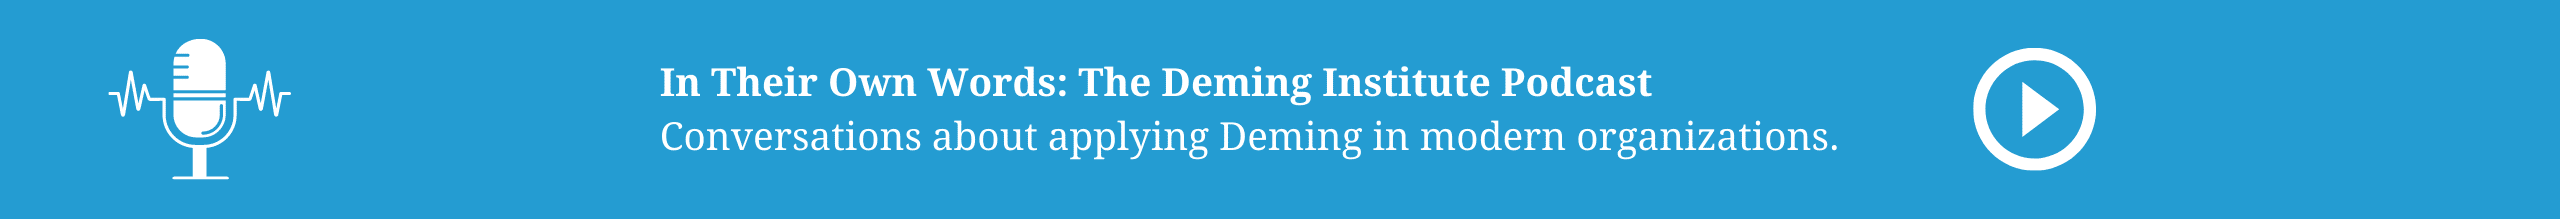 In Their Own Words: The Deming Institute Podcast - Conversations on implementing Deming in modern organizations